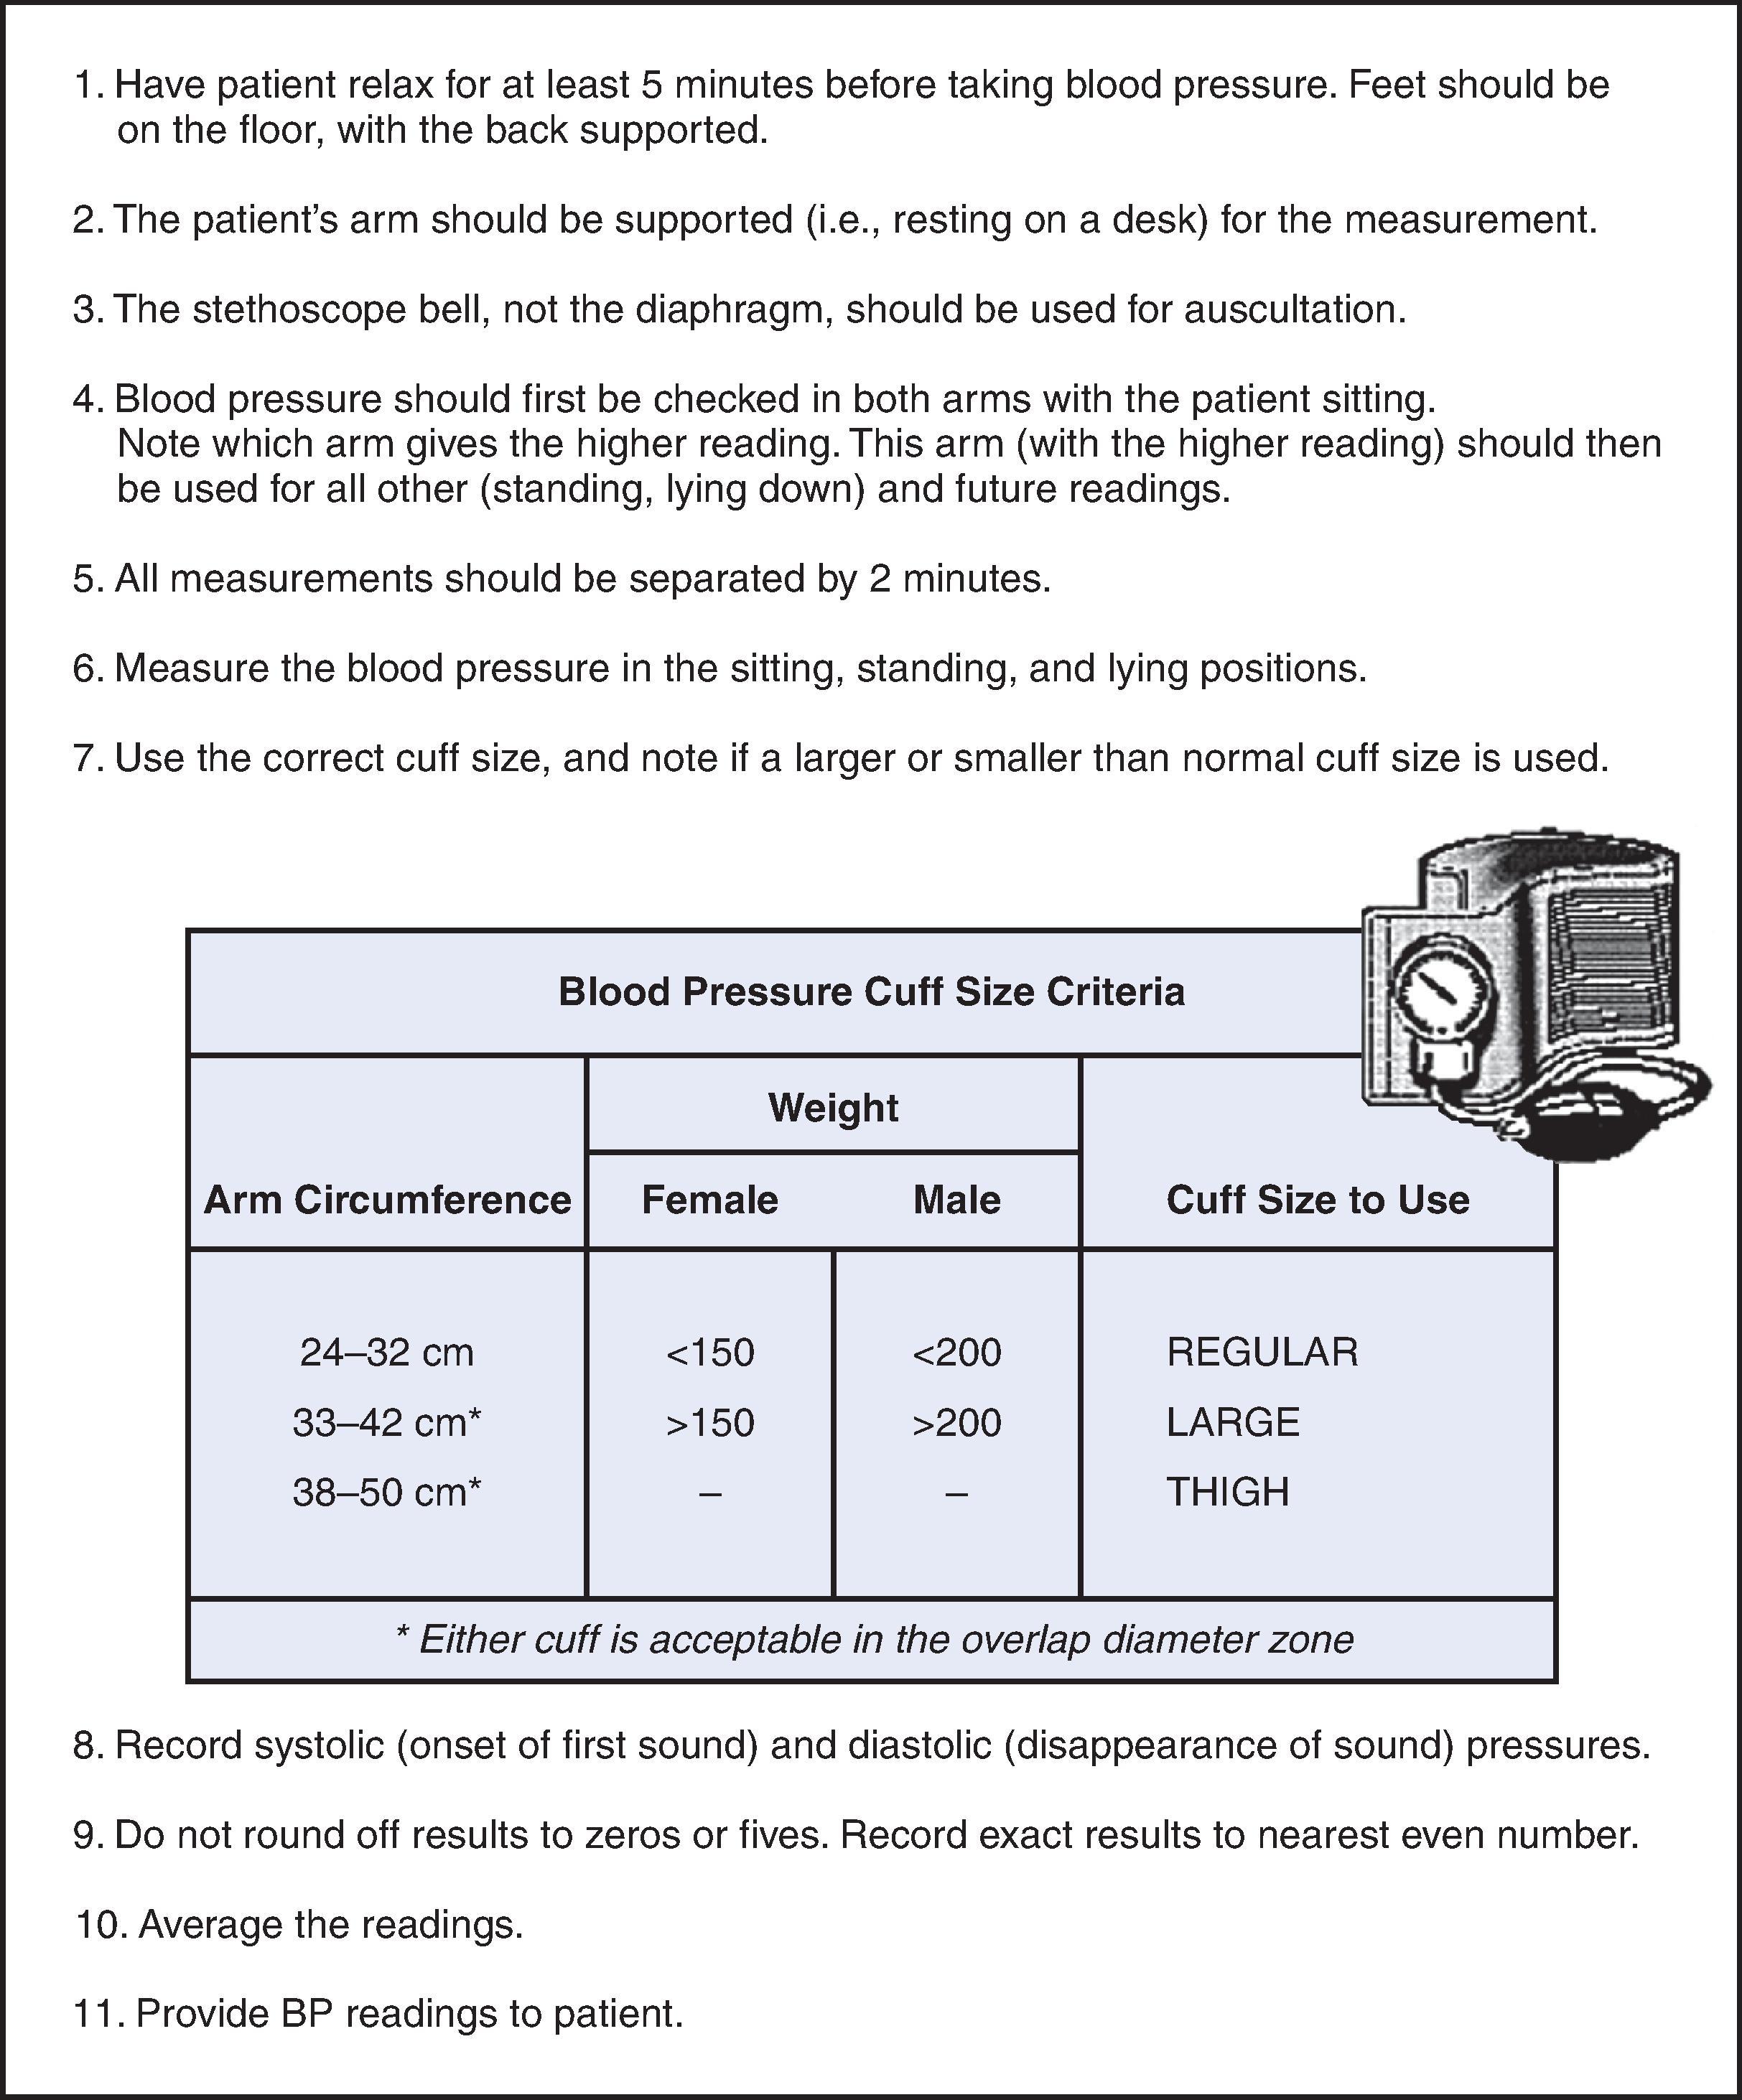 • Fig. 64.1, Instructions for taking blood pressure. Steps in obtaining accurate blood pressure measurements by aneroid sphygmomanometry.